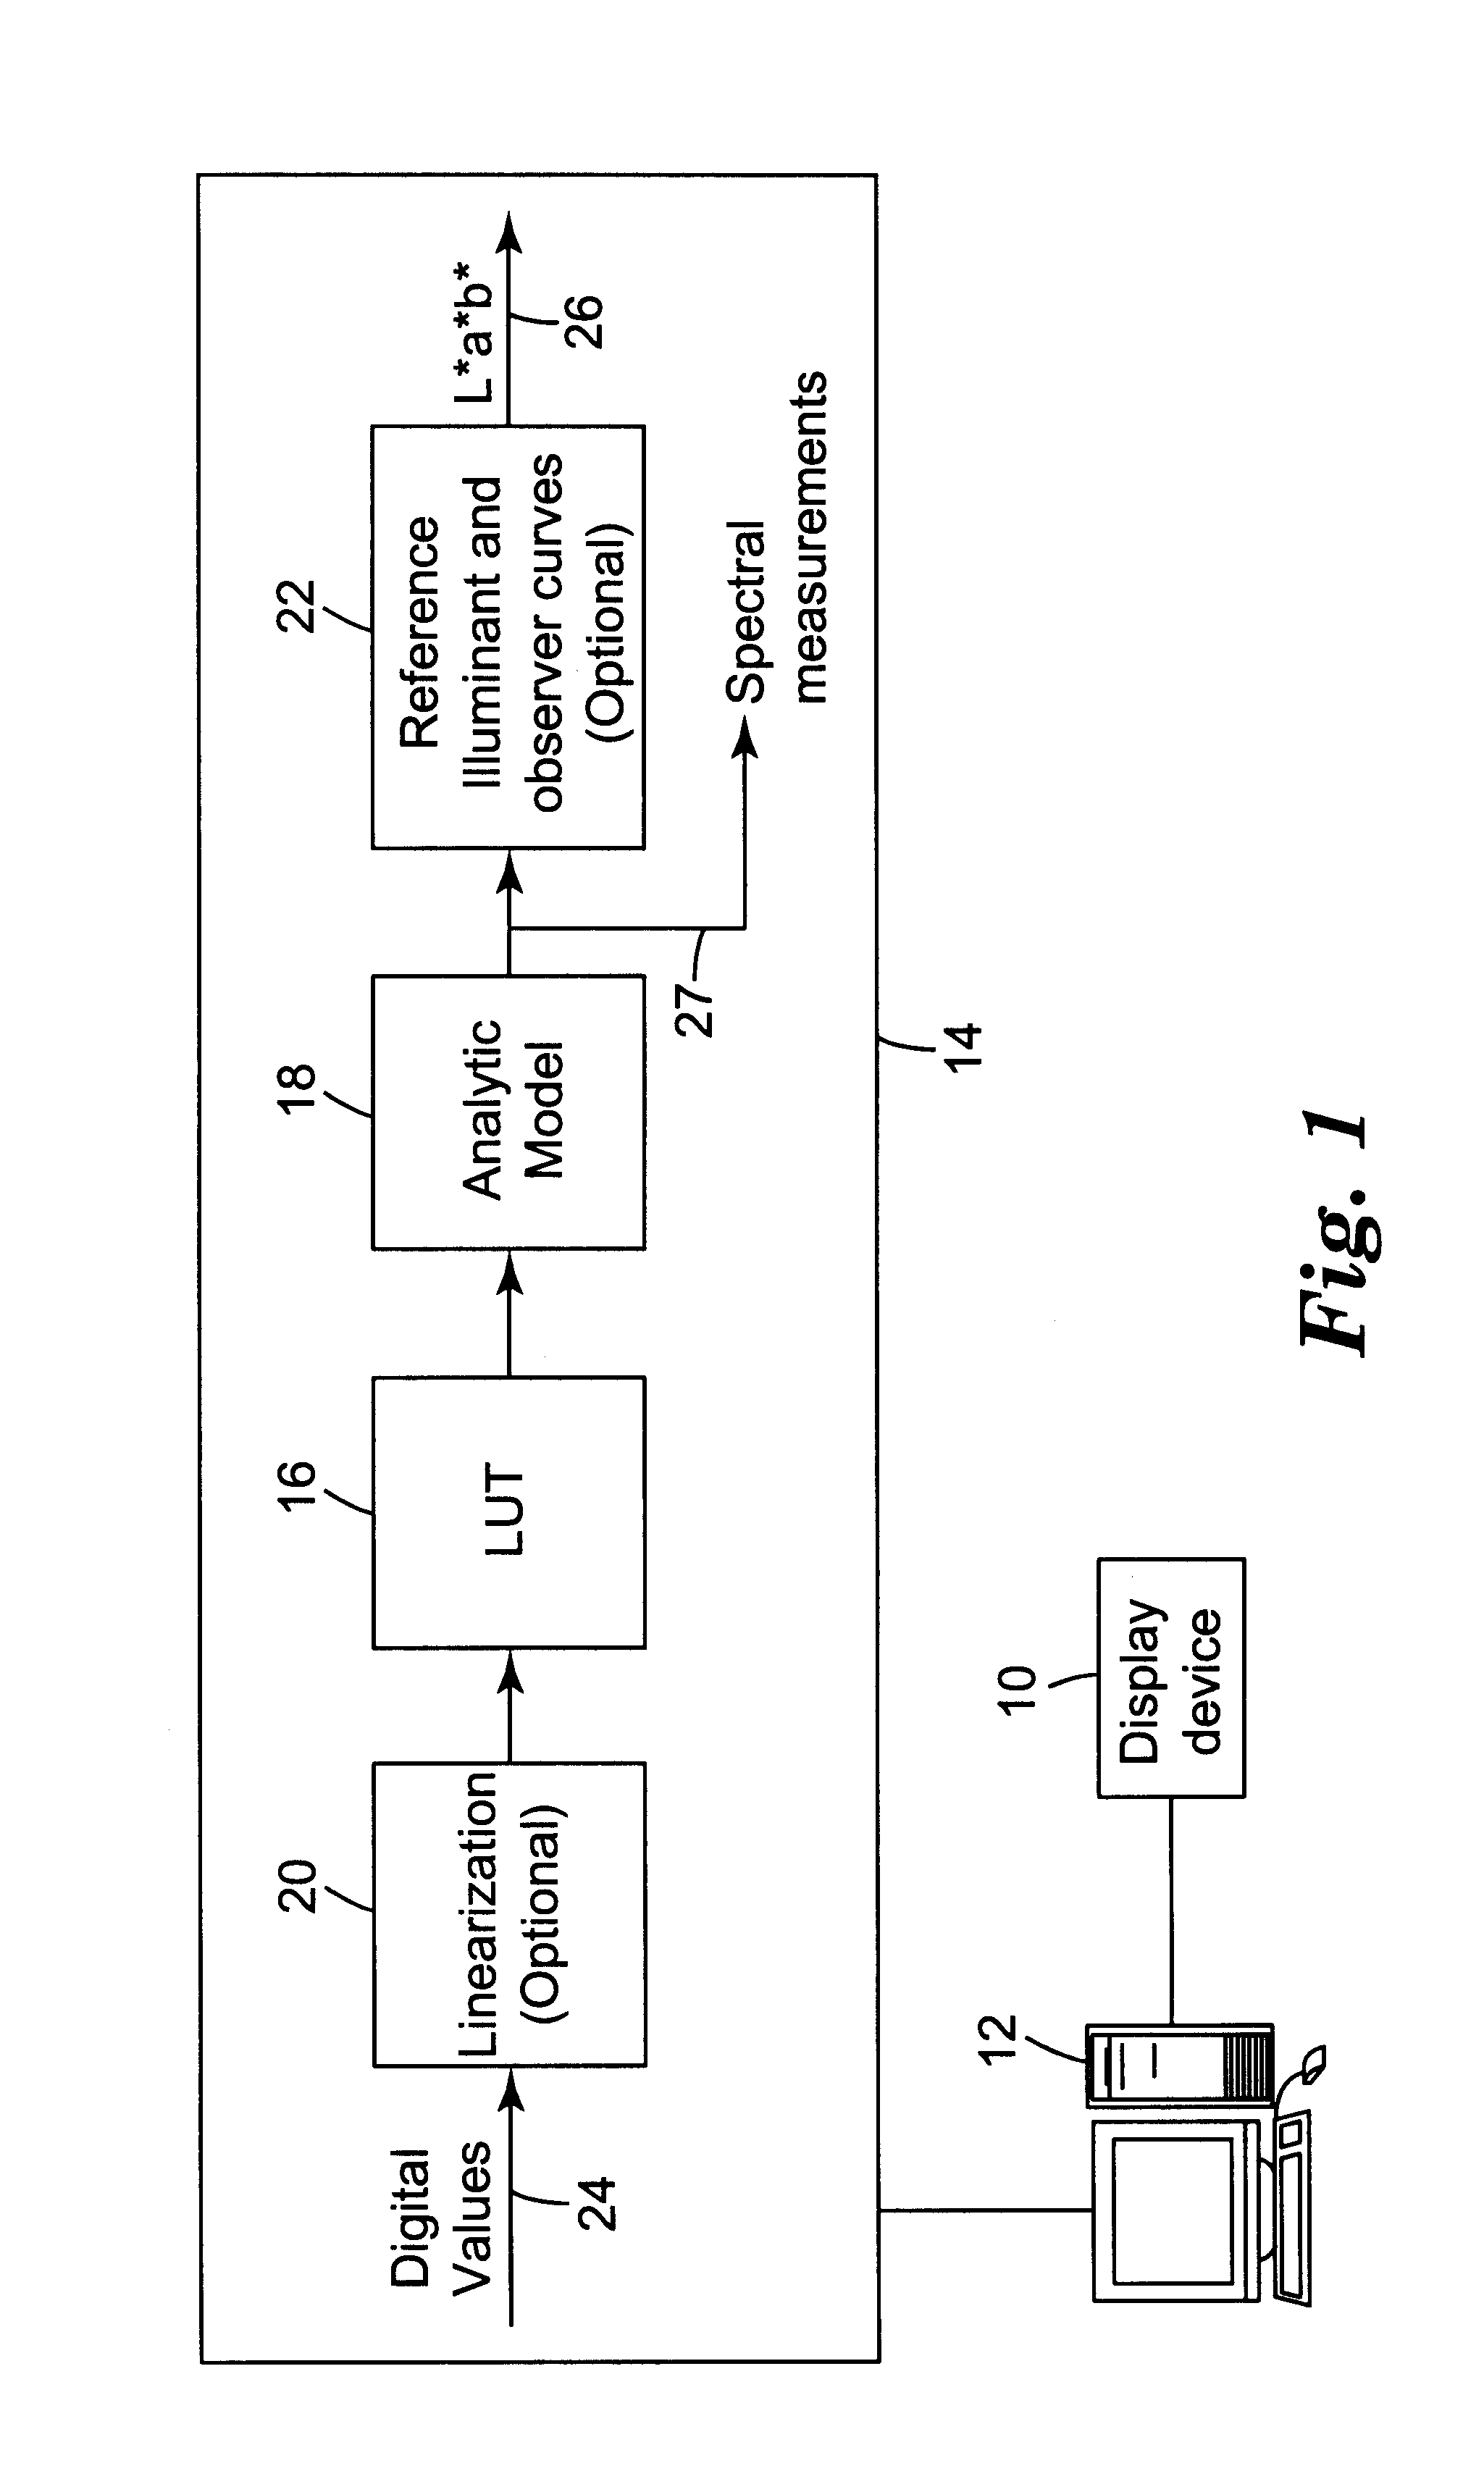 Arrangement for high-accuracy colorimetric characterization of display devices and method therefor